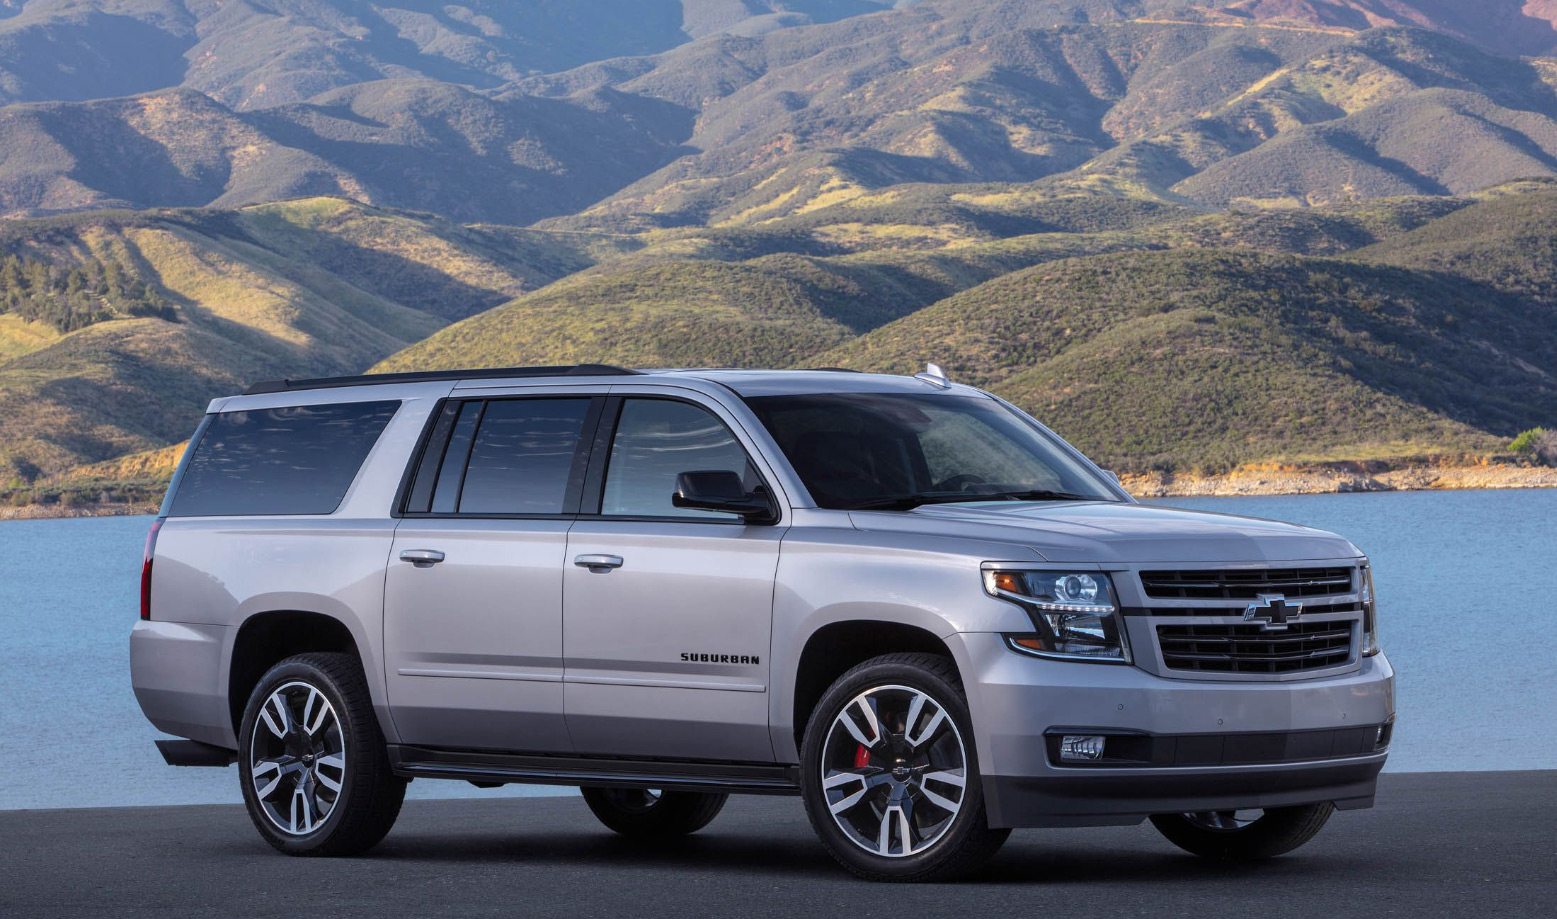 Valley Chevy - 2019 Suburban RST Pictures & Specs - Front Sideview